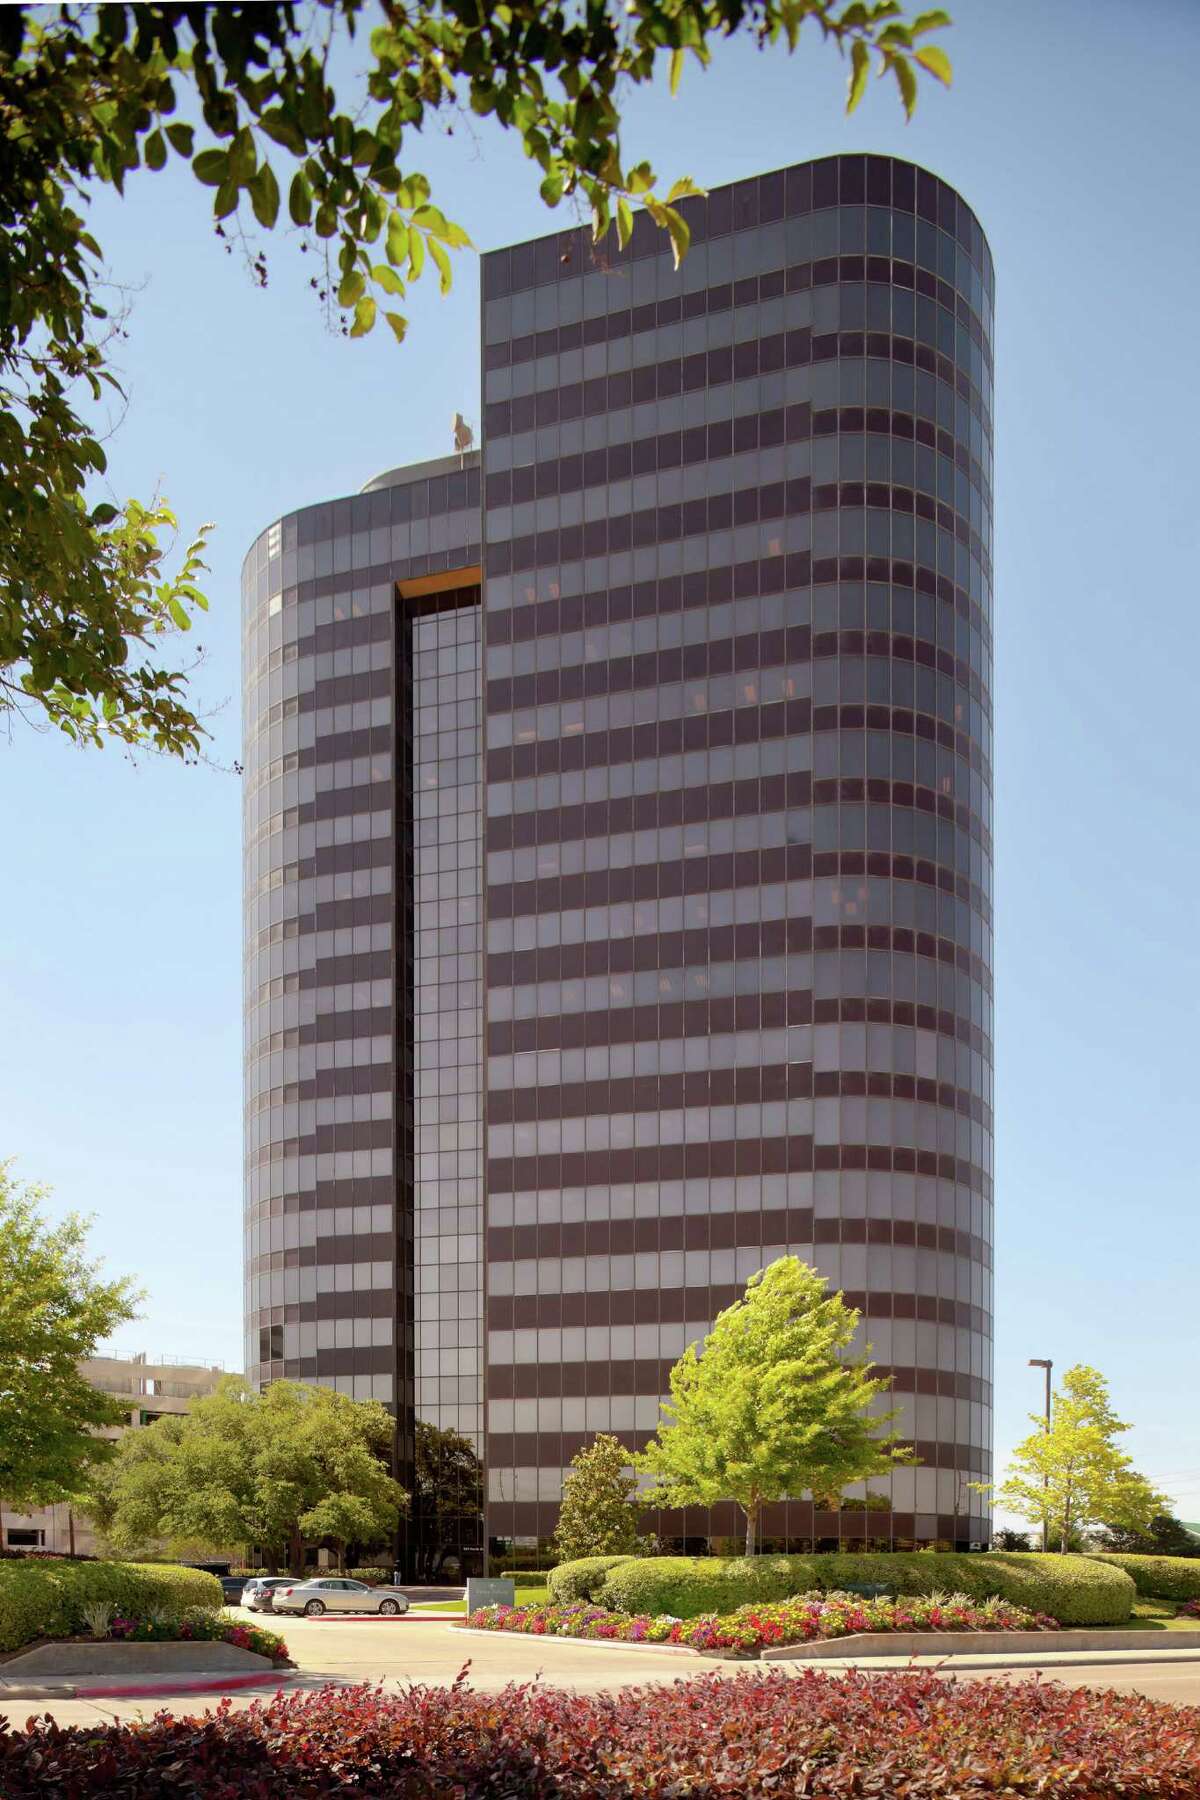 ORG Chemical Holdings has signed up for space in 363 N. Sam Houston Parkway in Greenspoint.